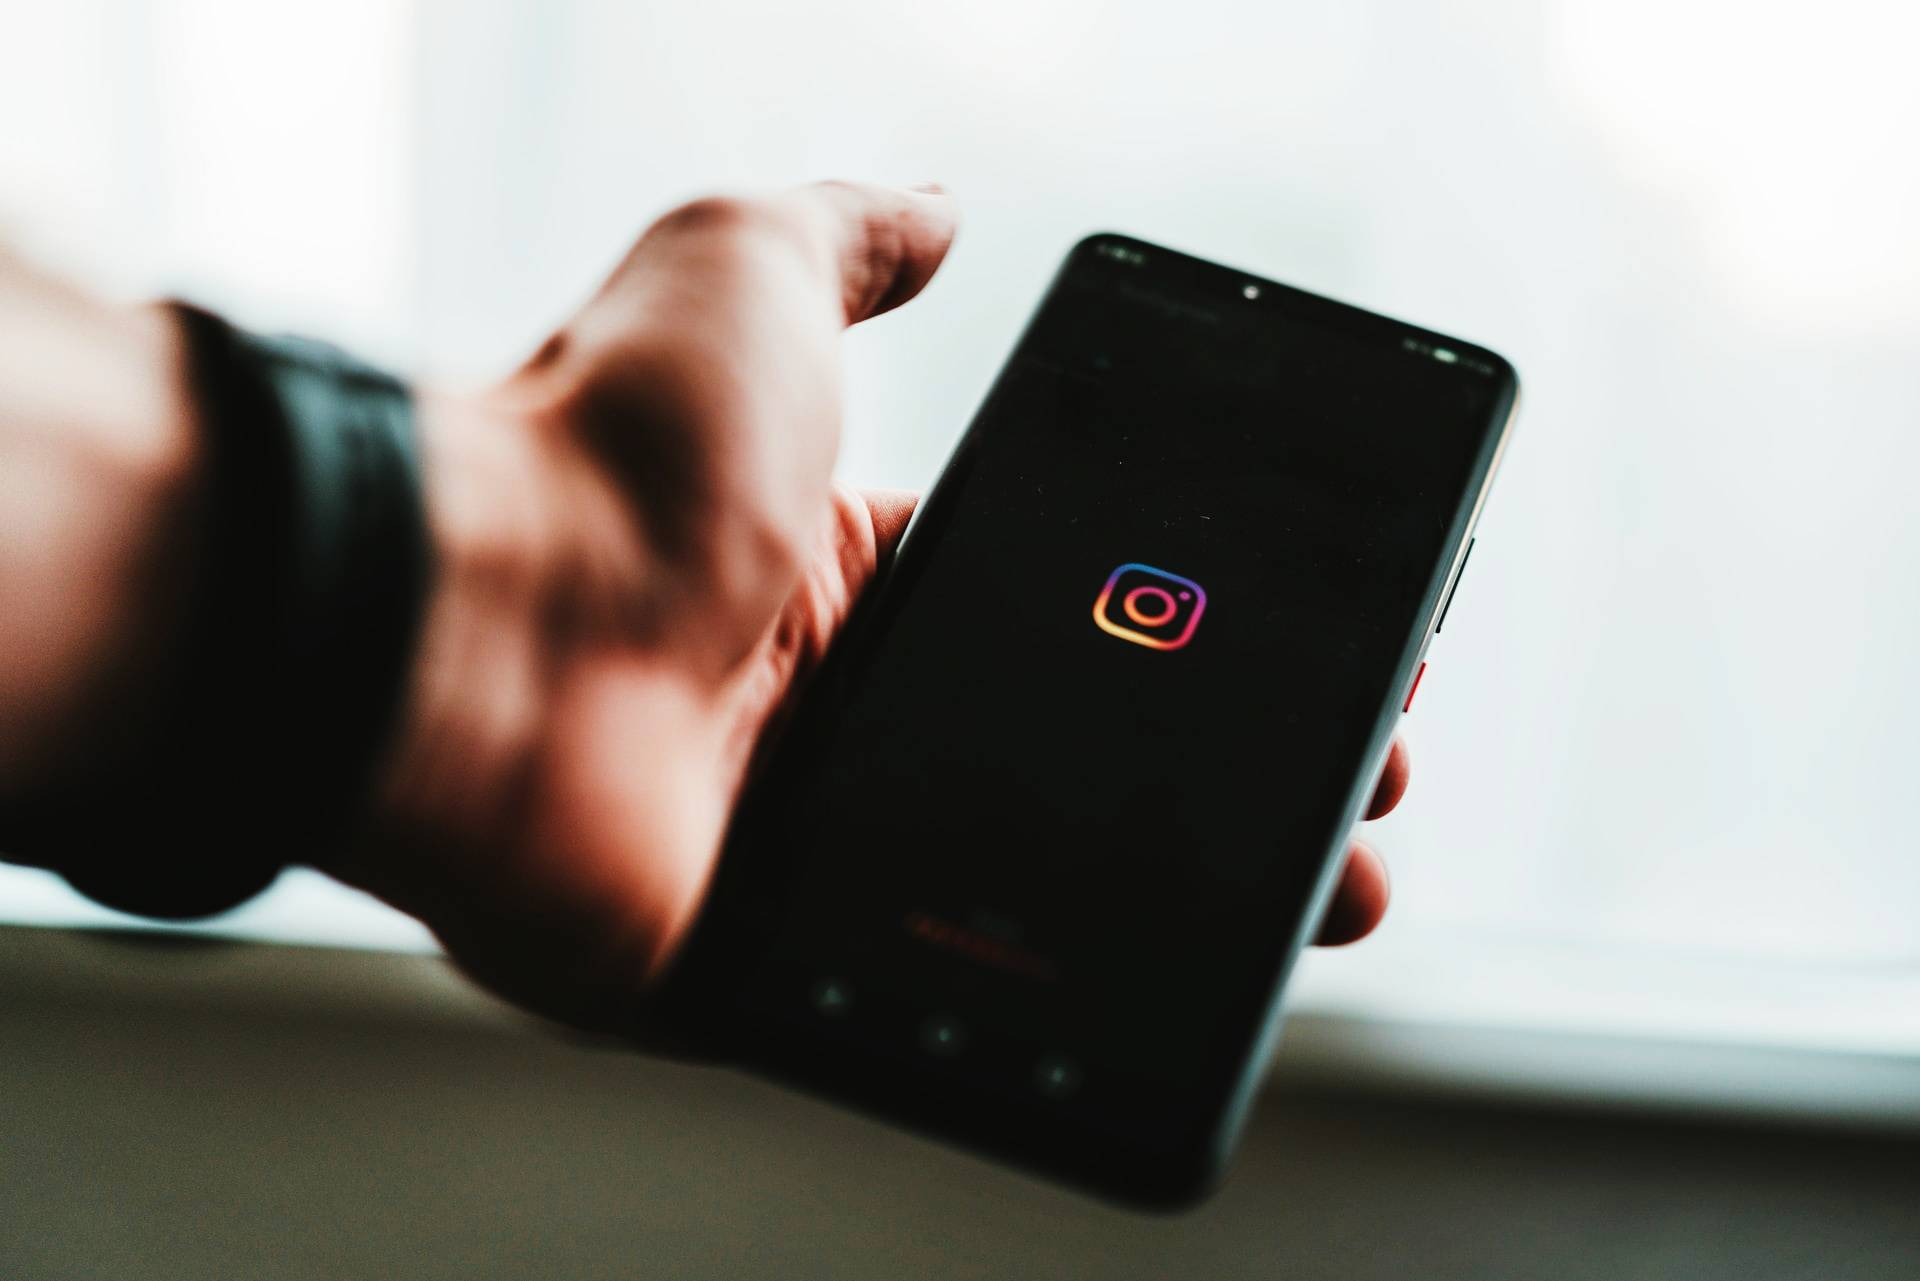 How to speed up the process of getting followers on Instagram?